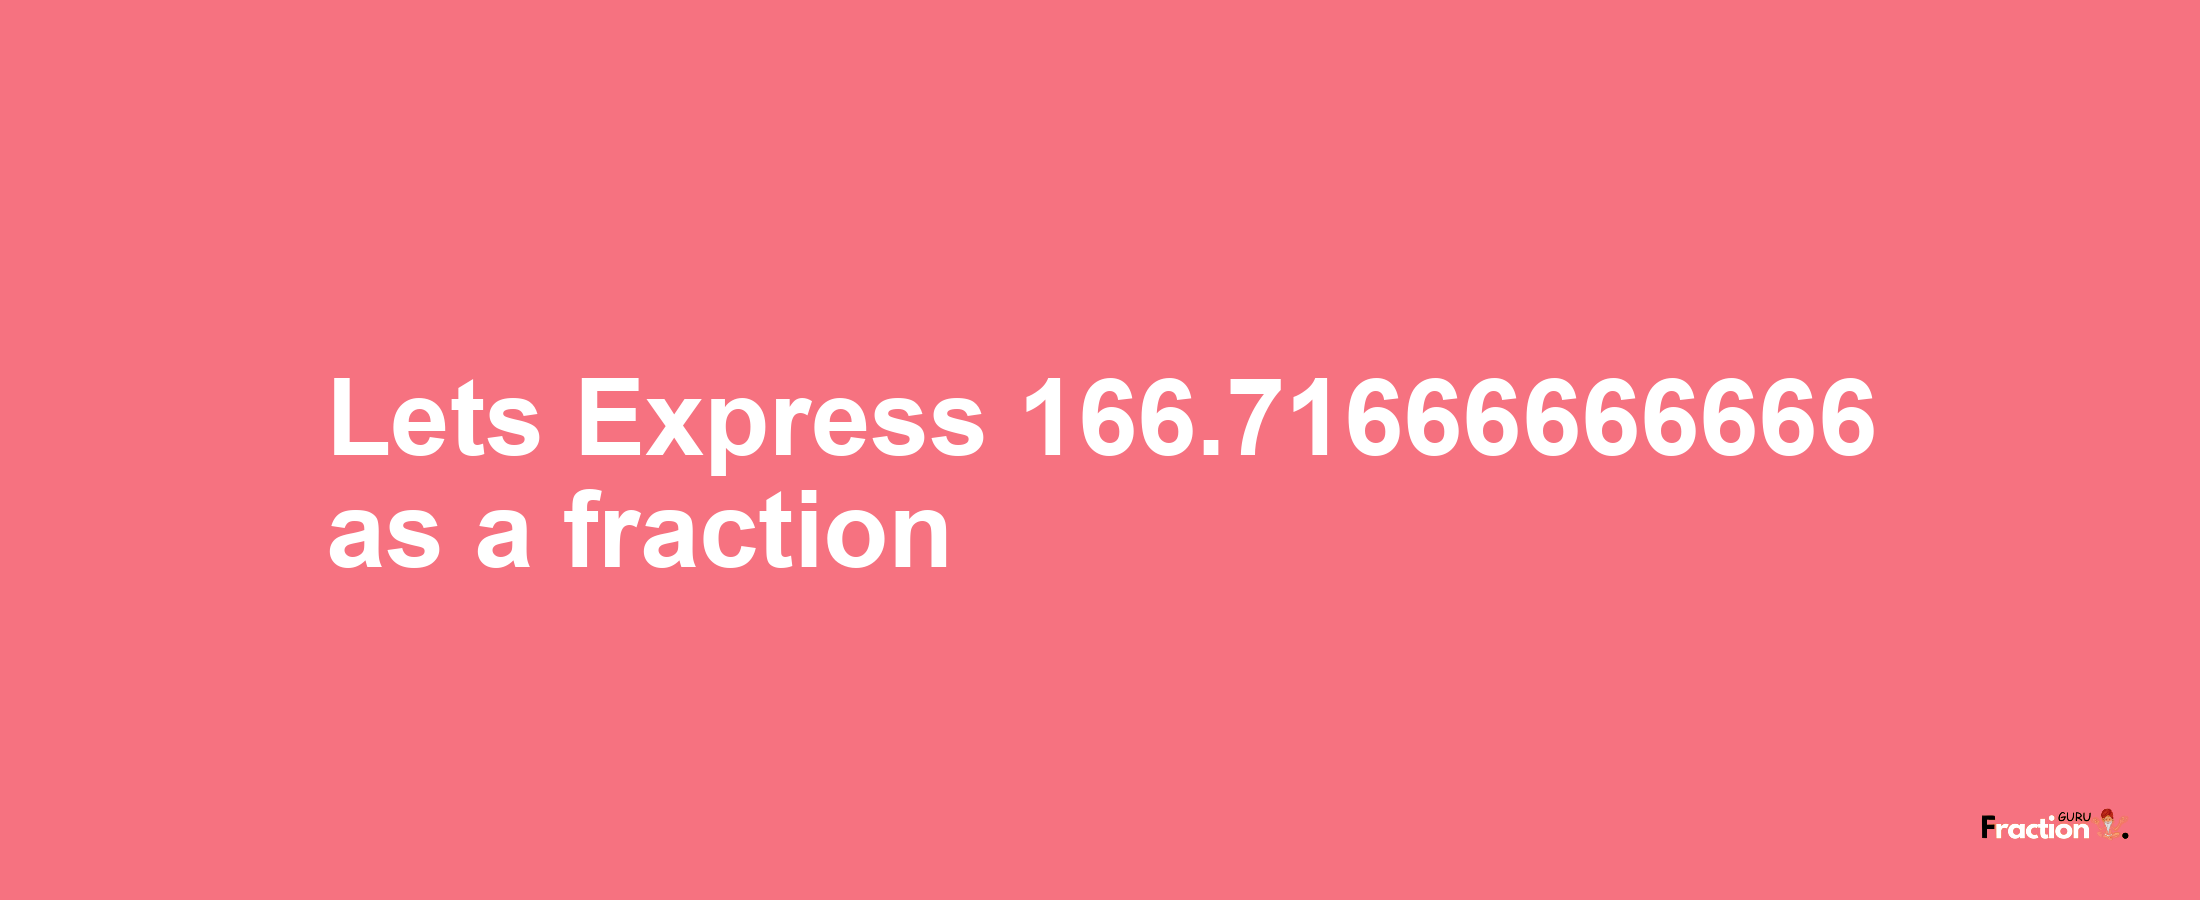 Lets Express 166.71666666666 as afraction